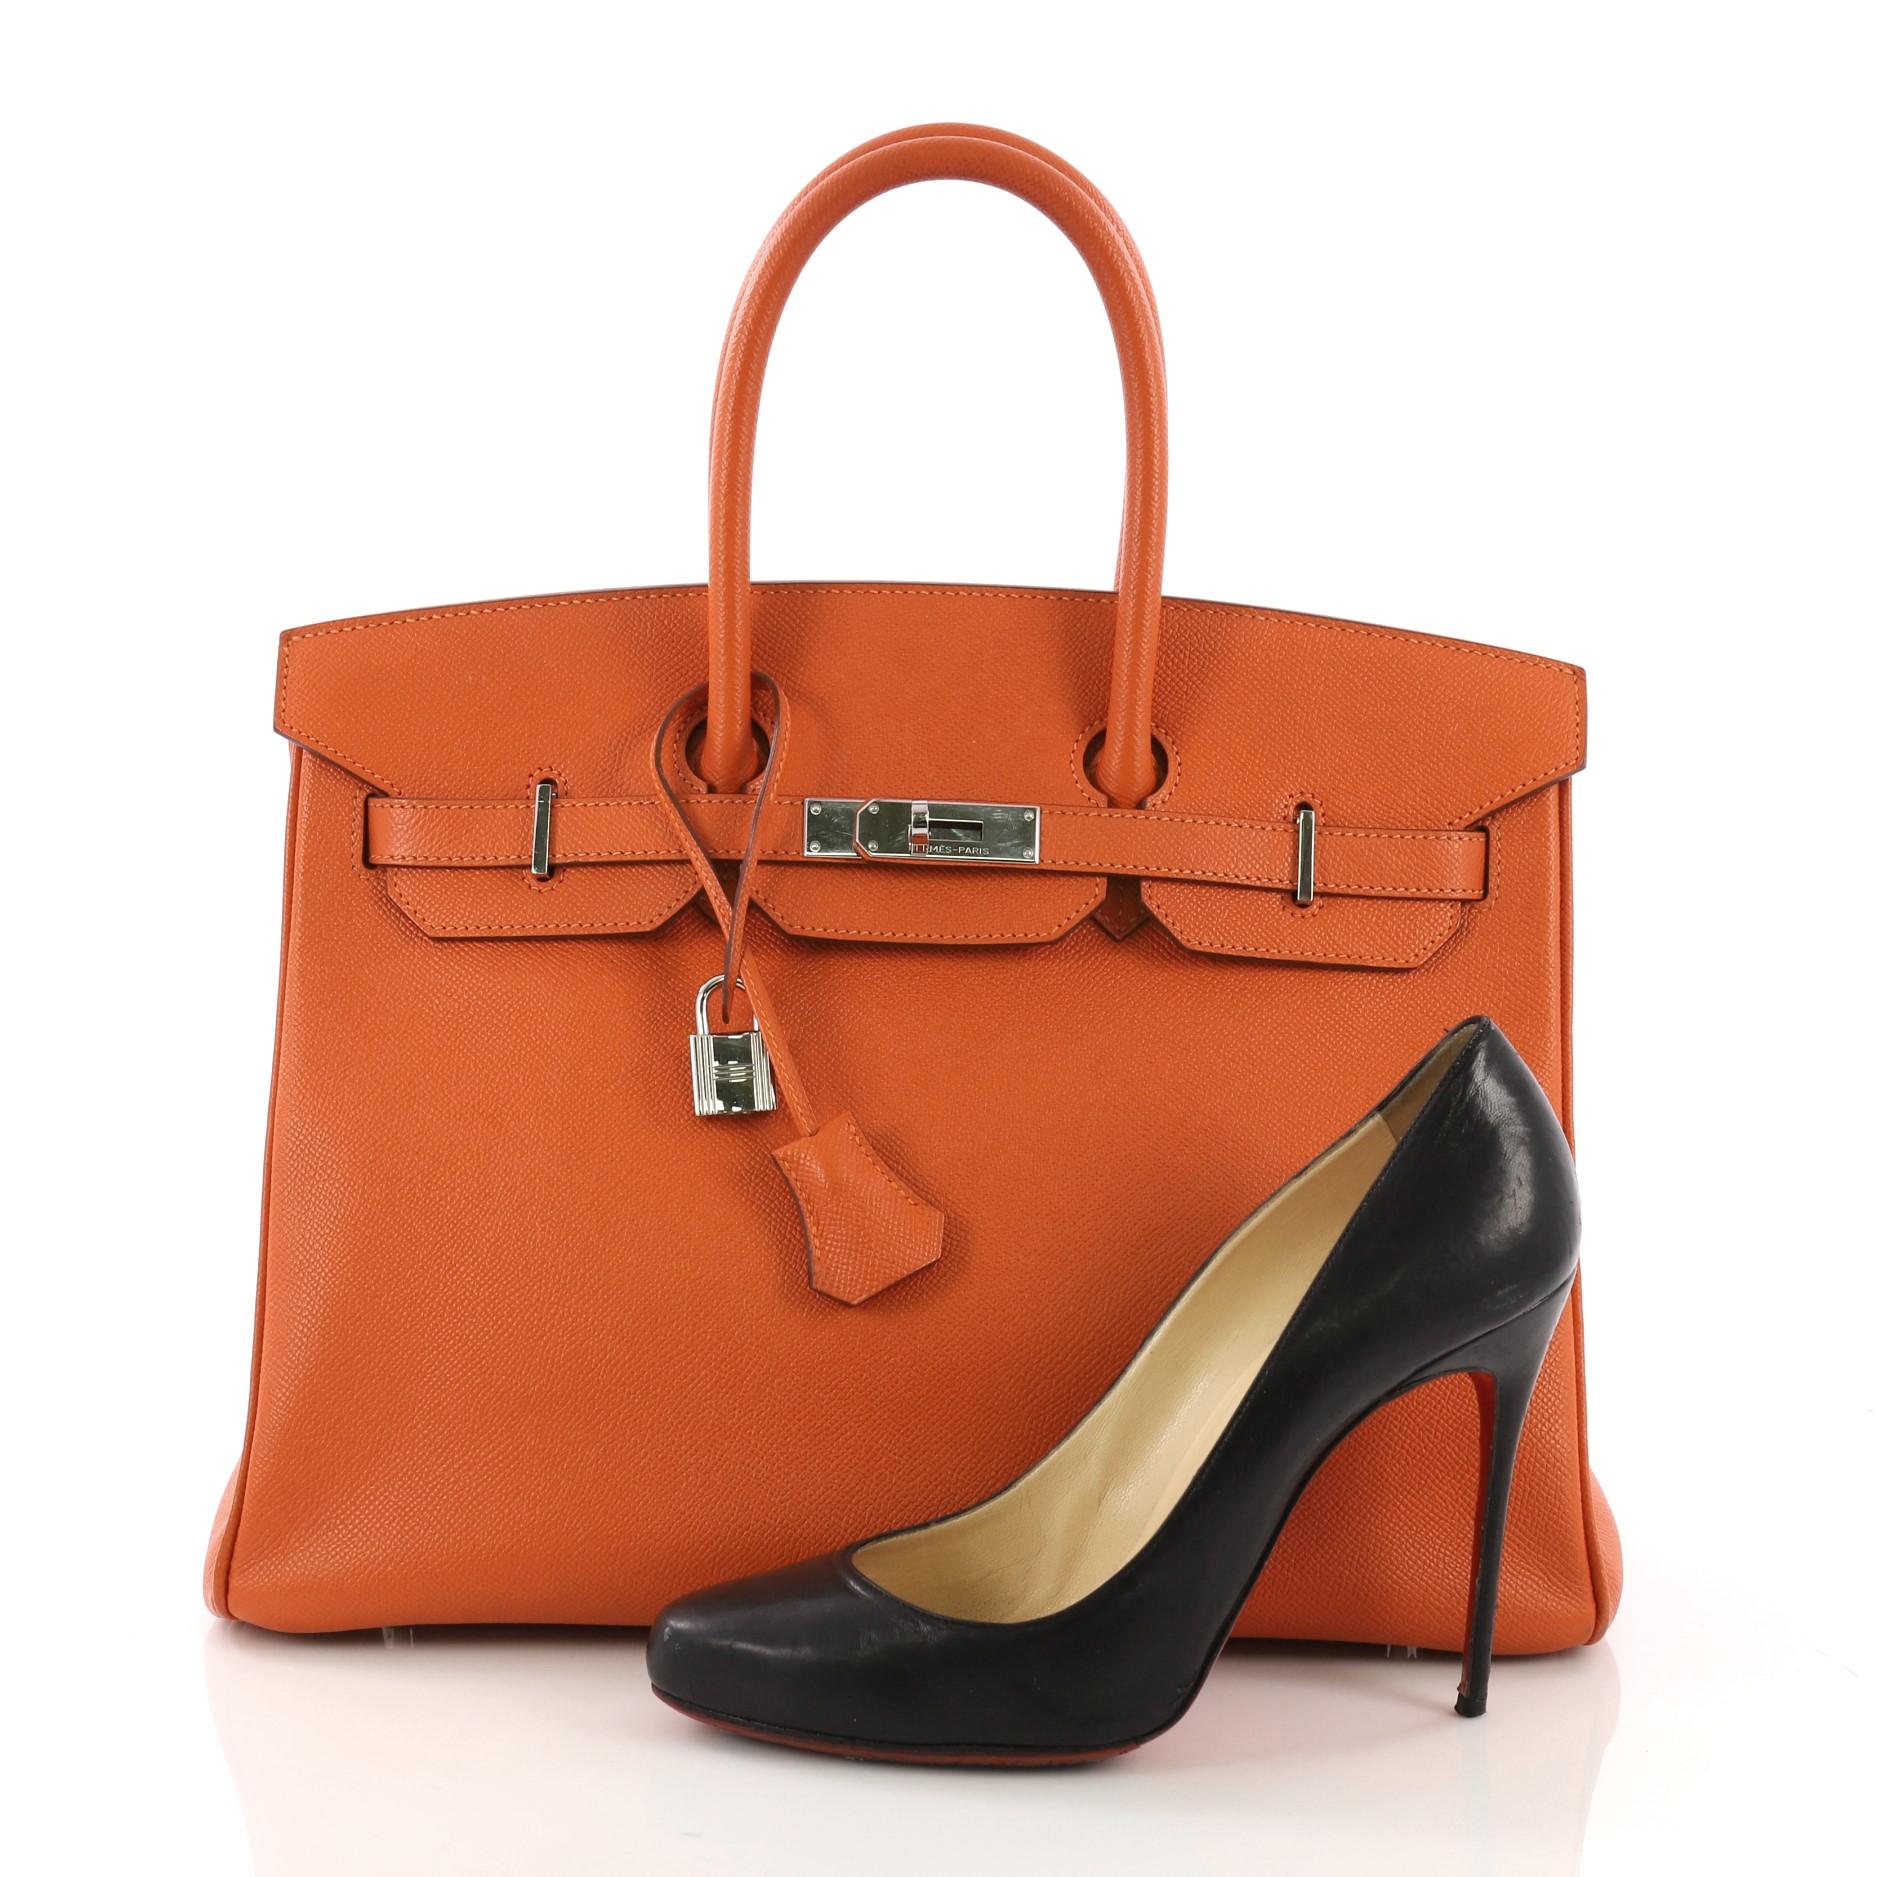 This Hermes Birkin 35, crafted in Orange H Epsom leather, features dual rolled top handles, frontal flap, and palladium hardware. Its turn-lock closure opens to an Orange H Chevre leather interior with zip and slip pockets. Date stamp reads: O